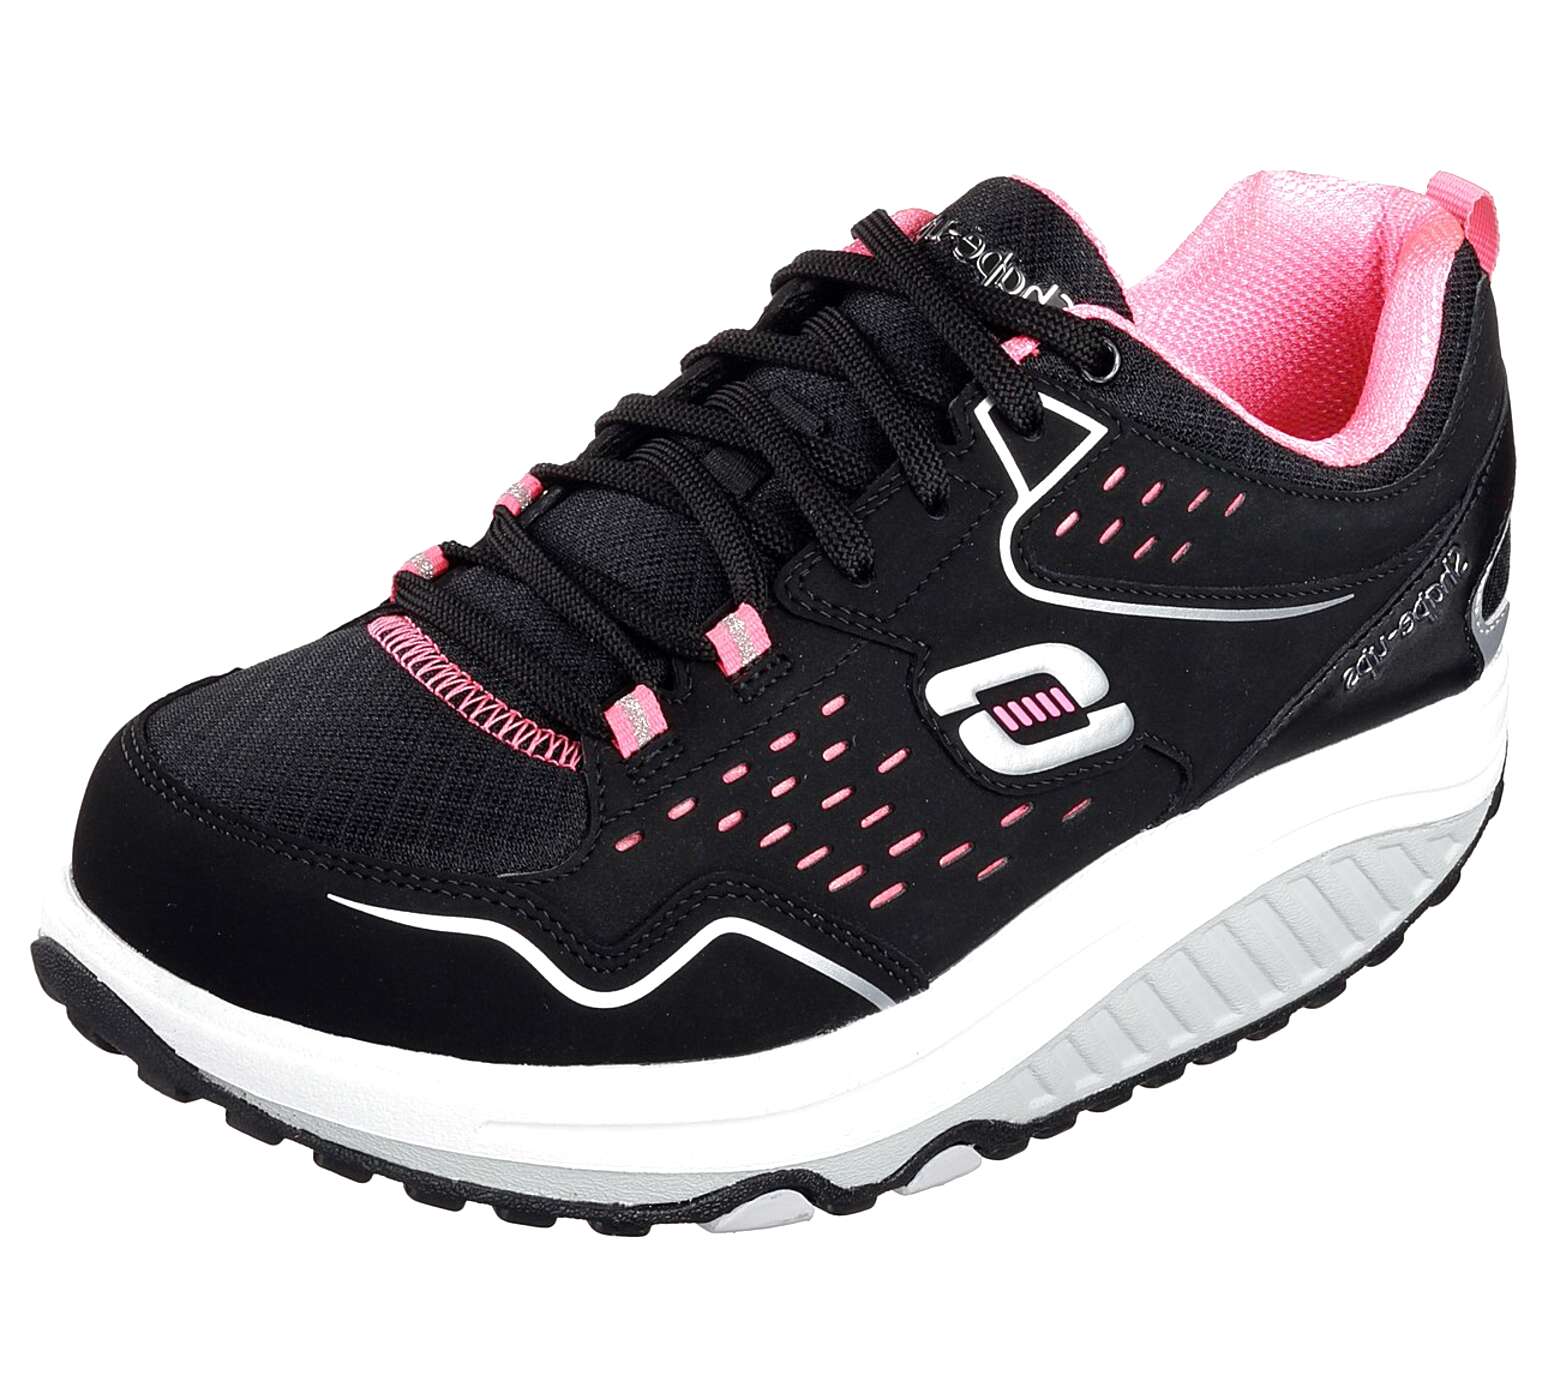 Skechers Shape Ups 6 for sale in UK View 24 bargains